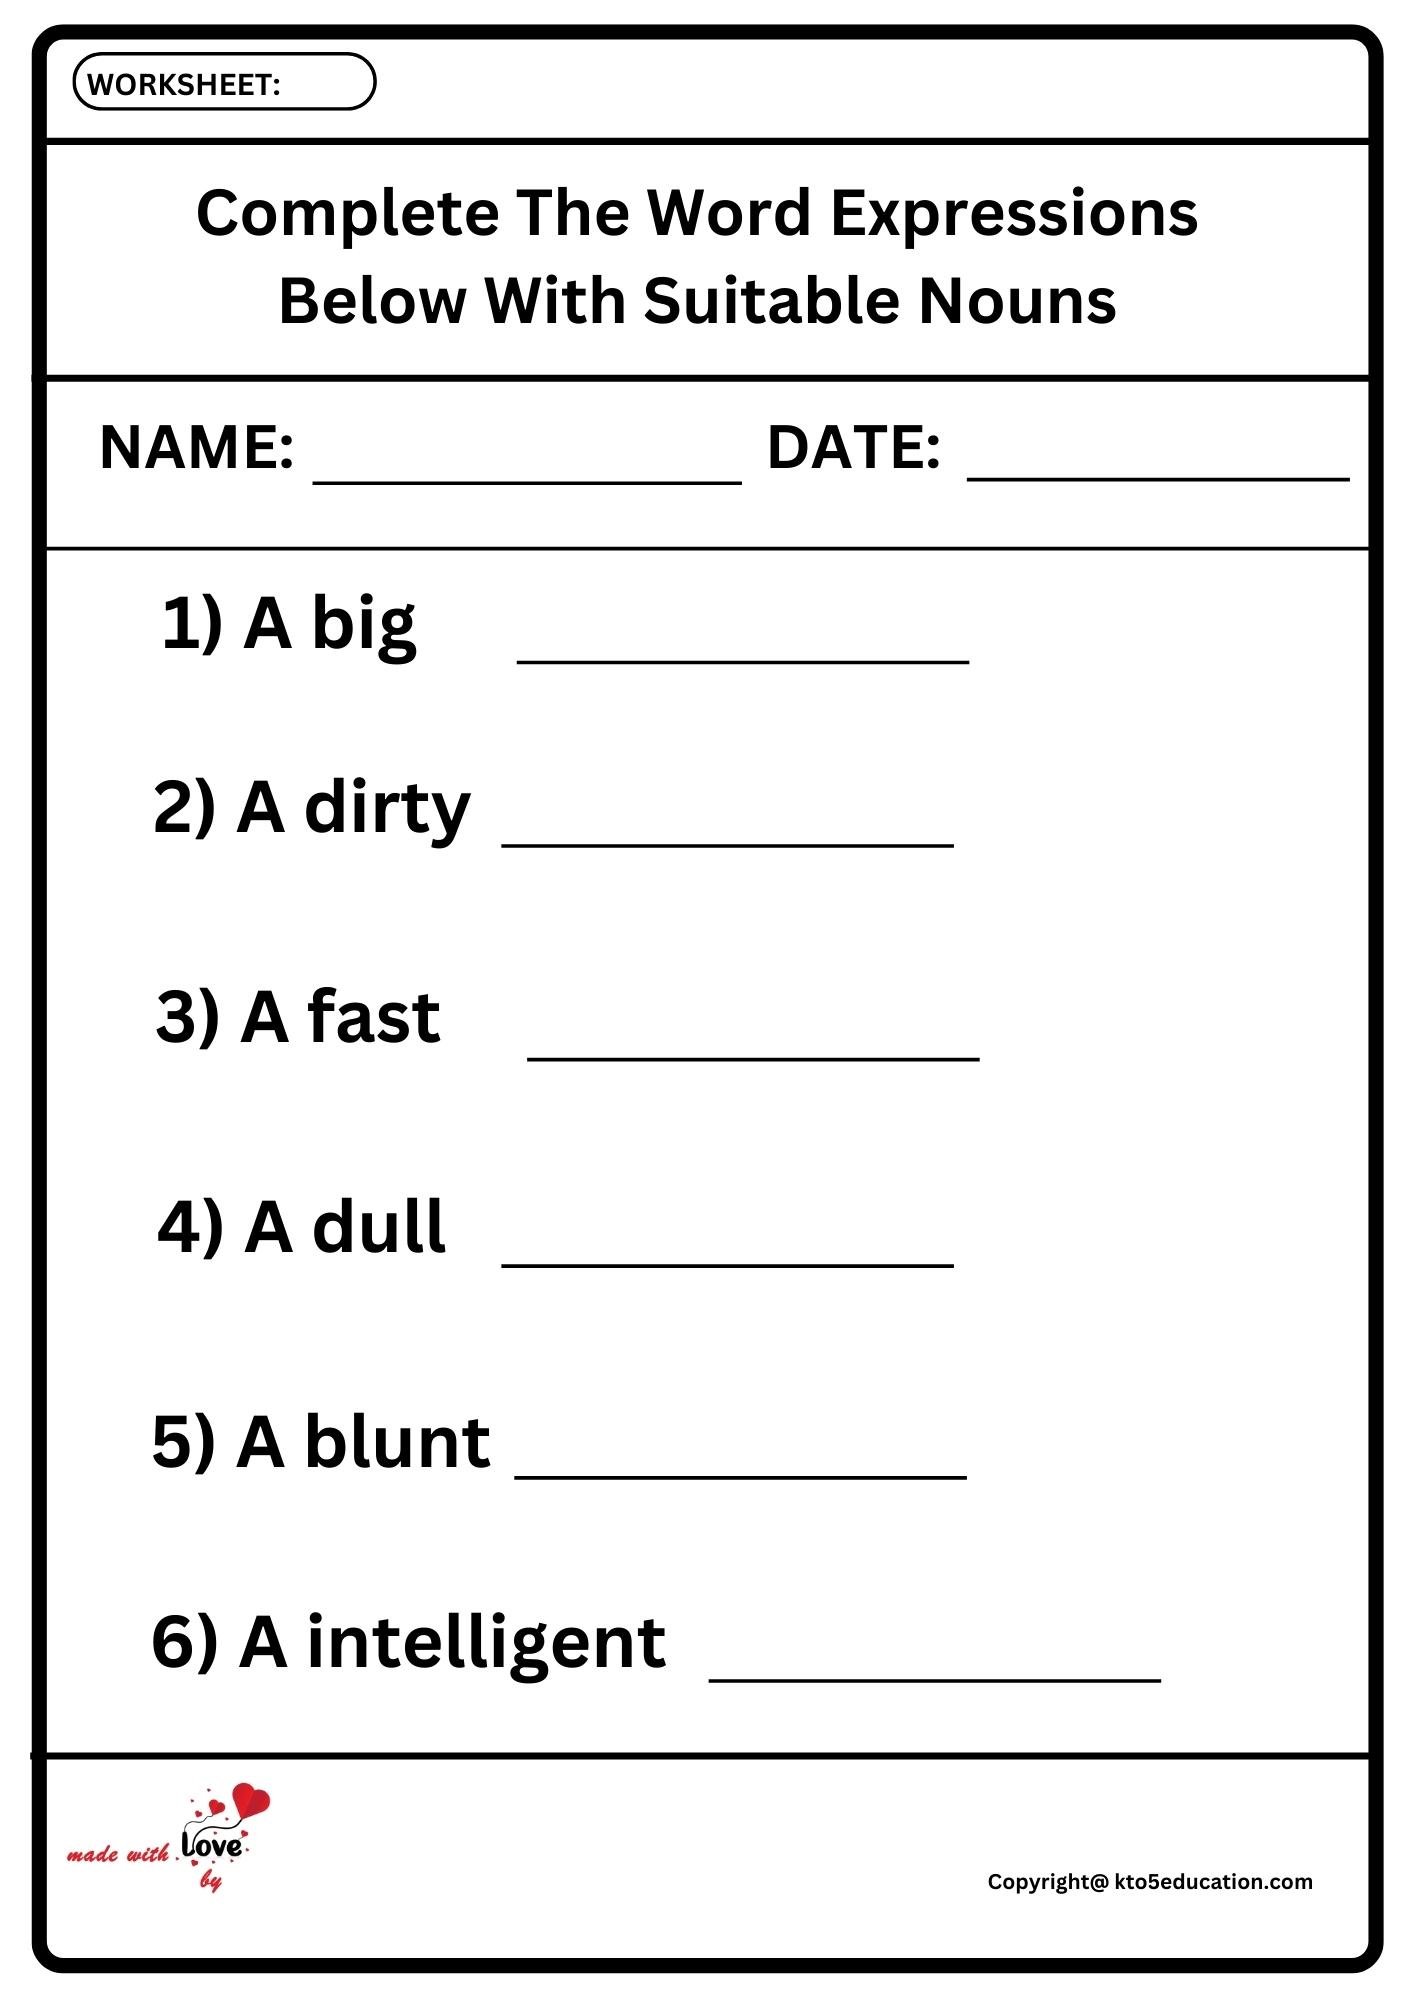 Complete The word Expressions Below With Suitable Nouns Worksheet